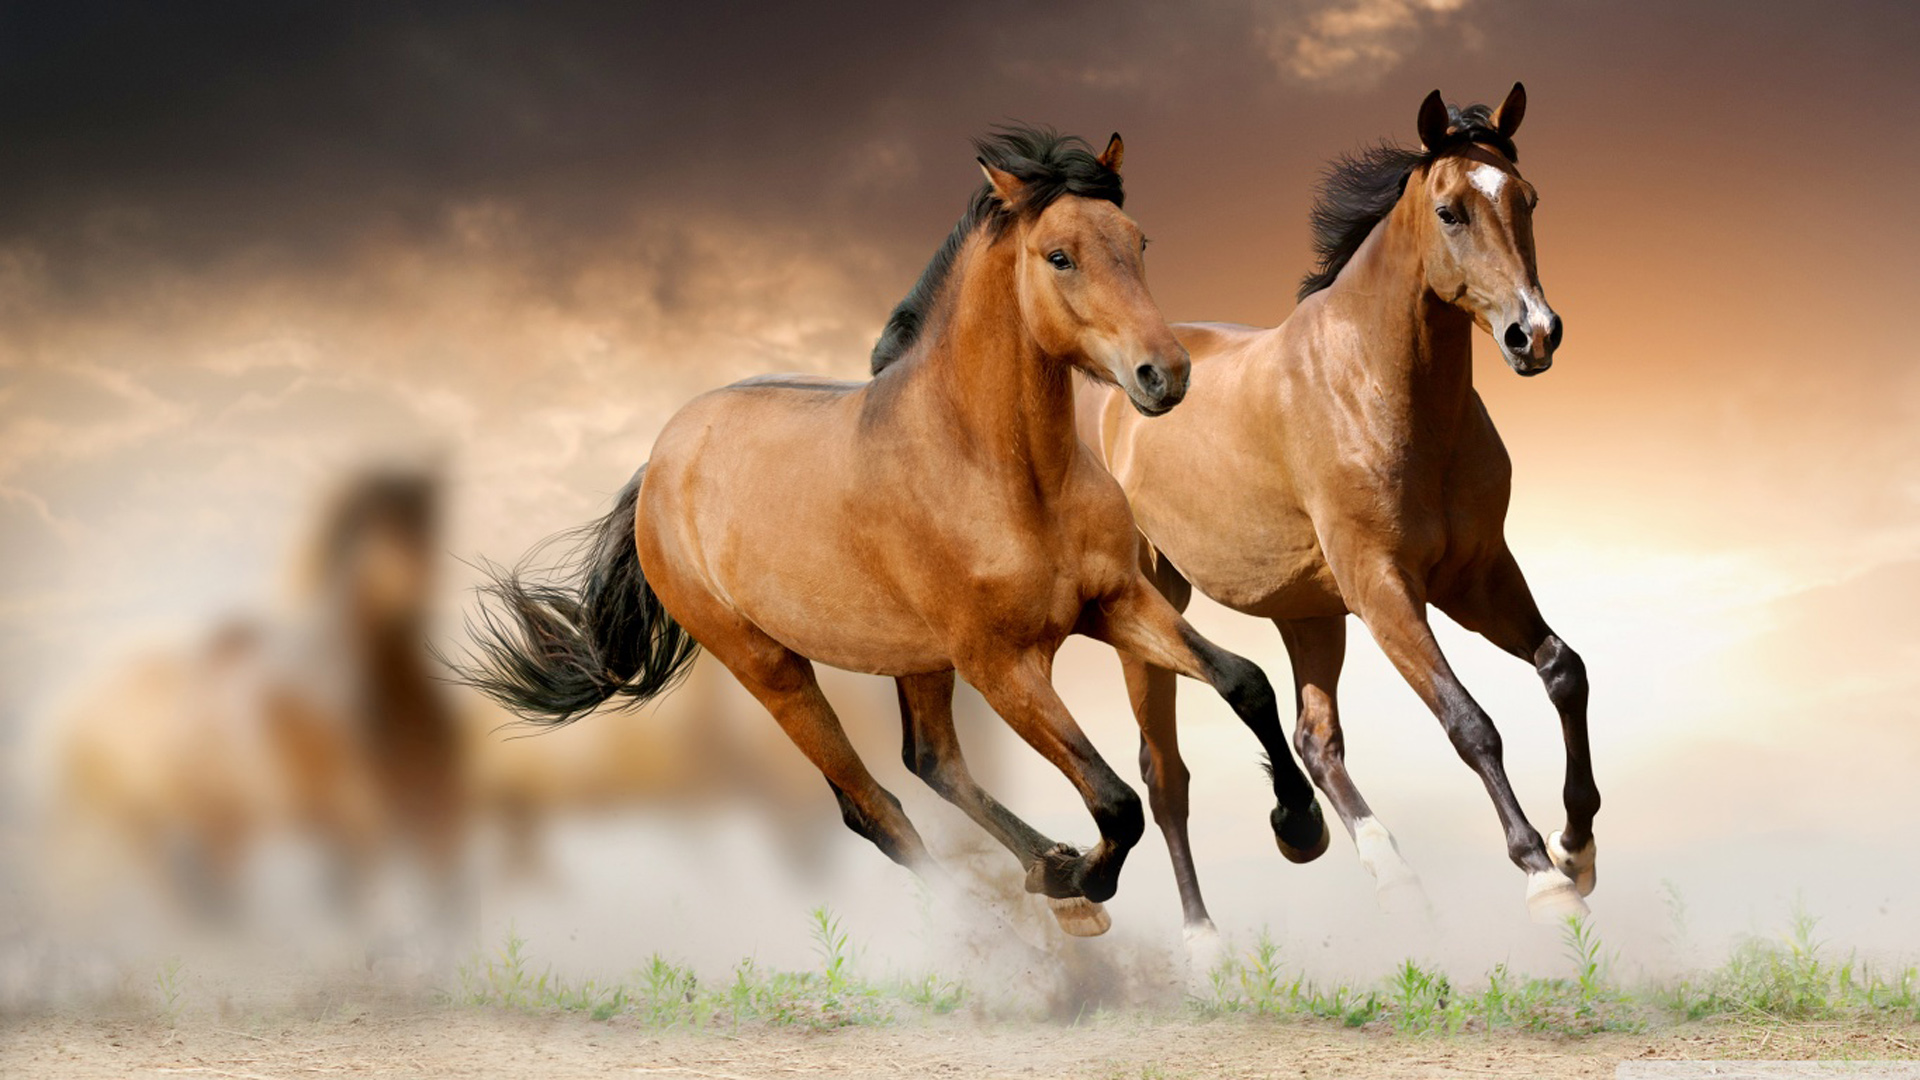 Brown Horses With Cloudy Sky Wallpaper 2K Horse